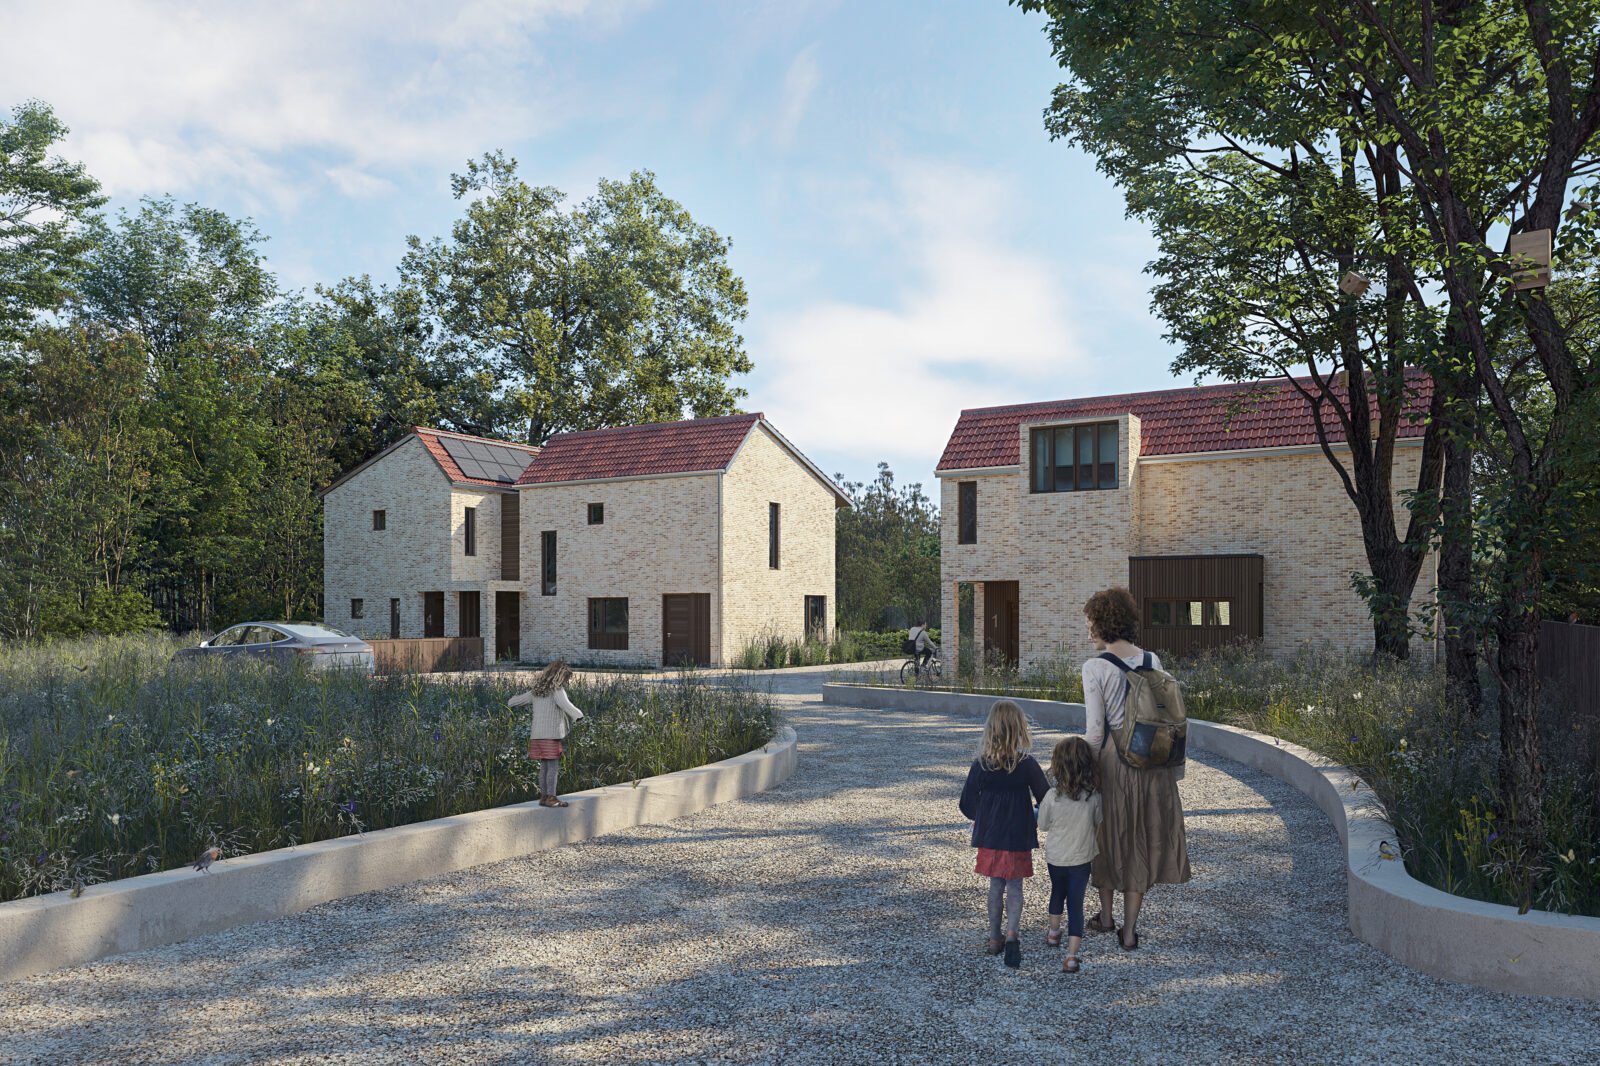 Residential Development of 5 eco-houses in Hampshire embracing local ecology